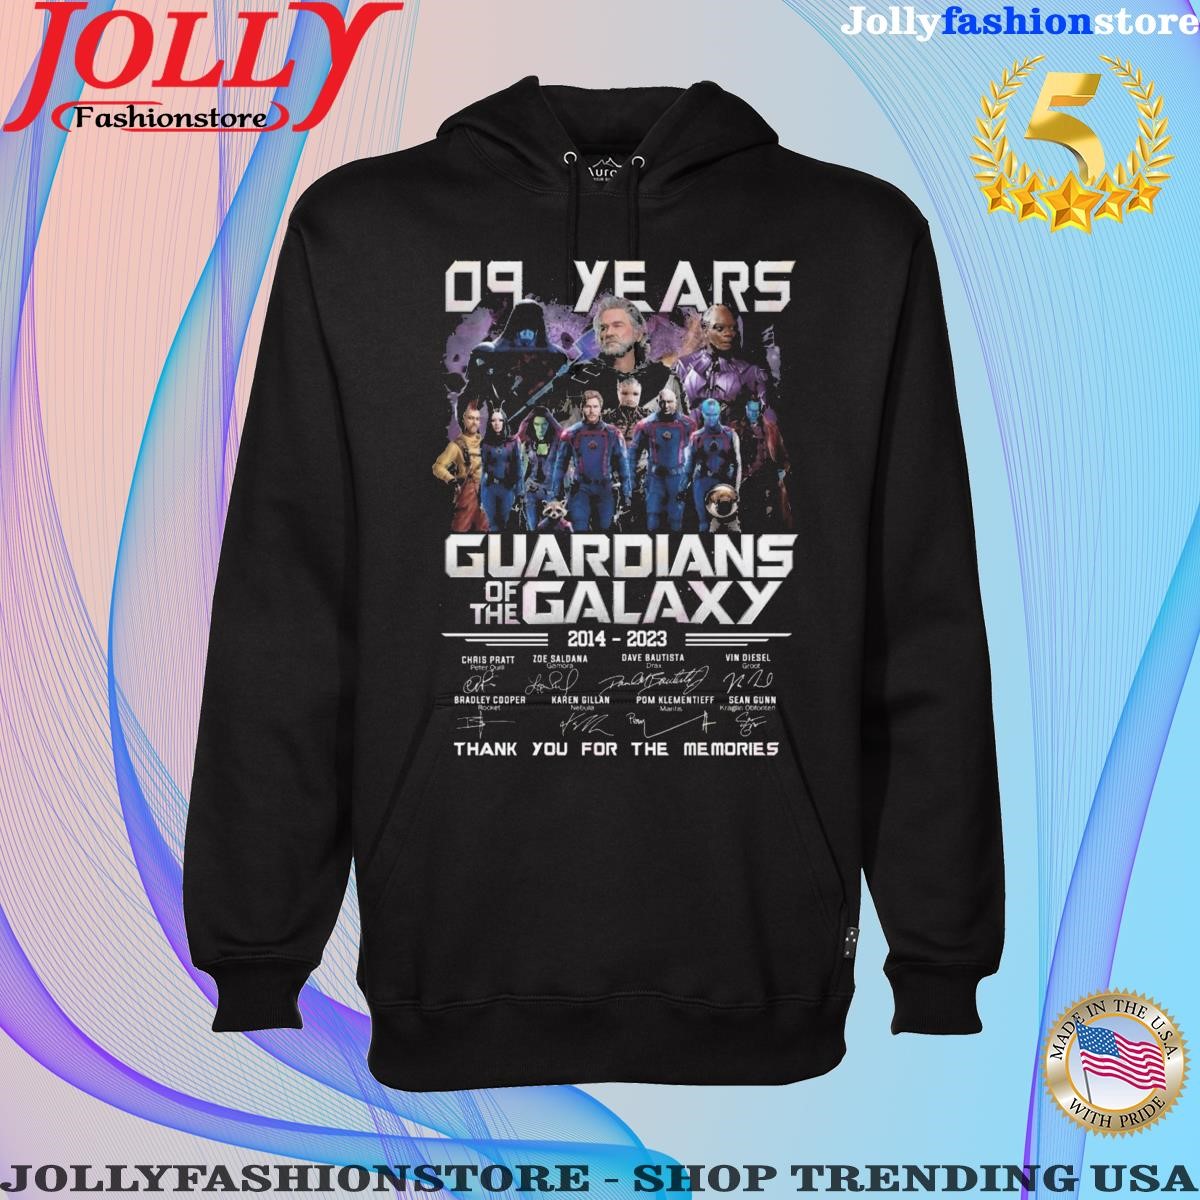 09 Years Guardians Of The Galaxy 2014 – 2023 Thank You For The Memories Hoodie shirt.png